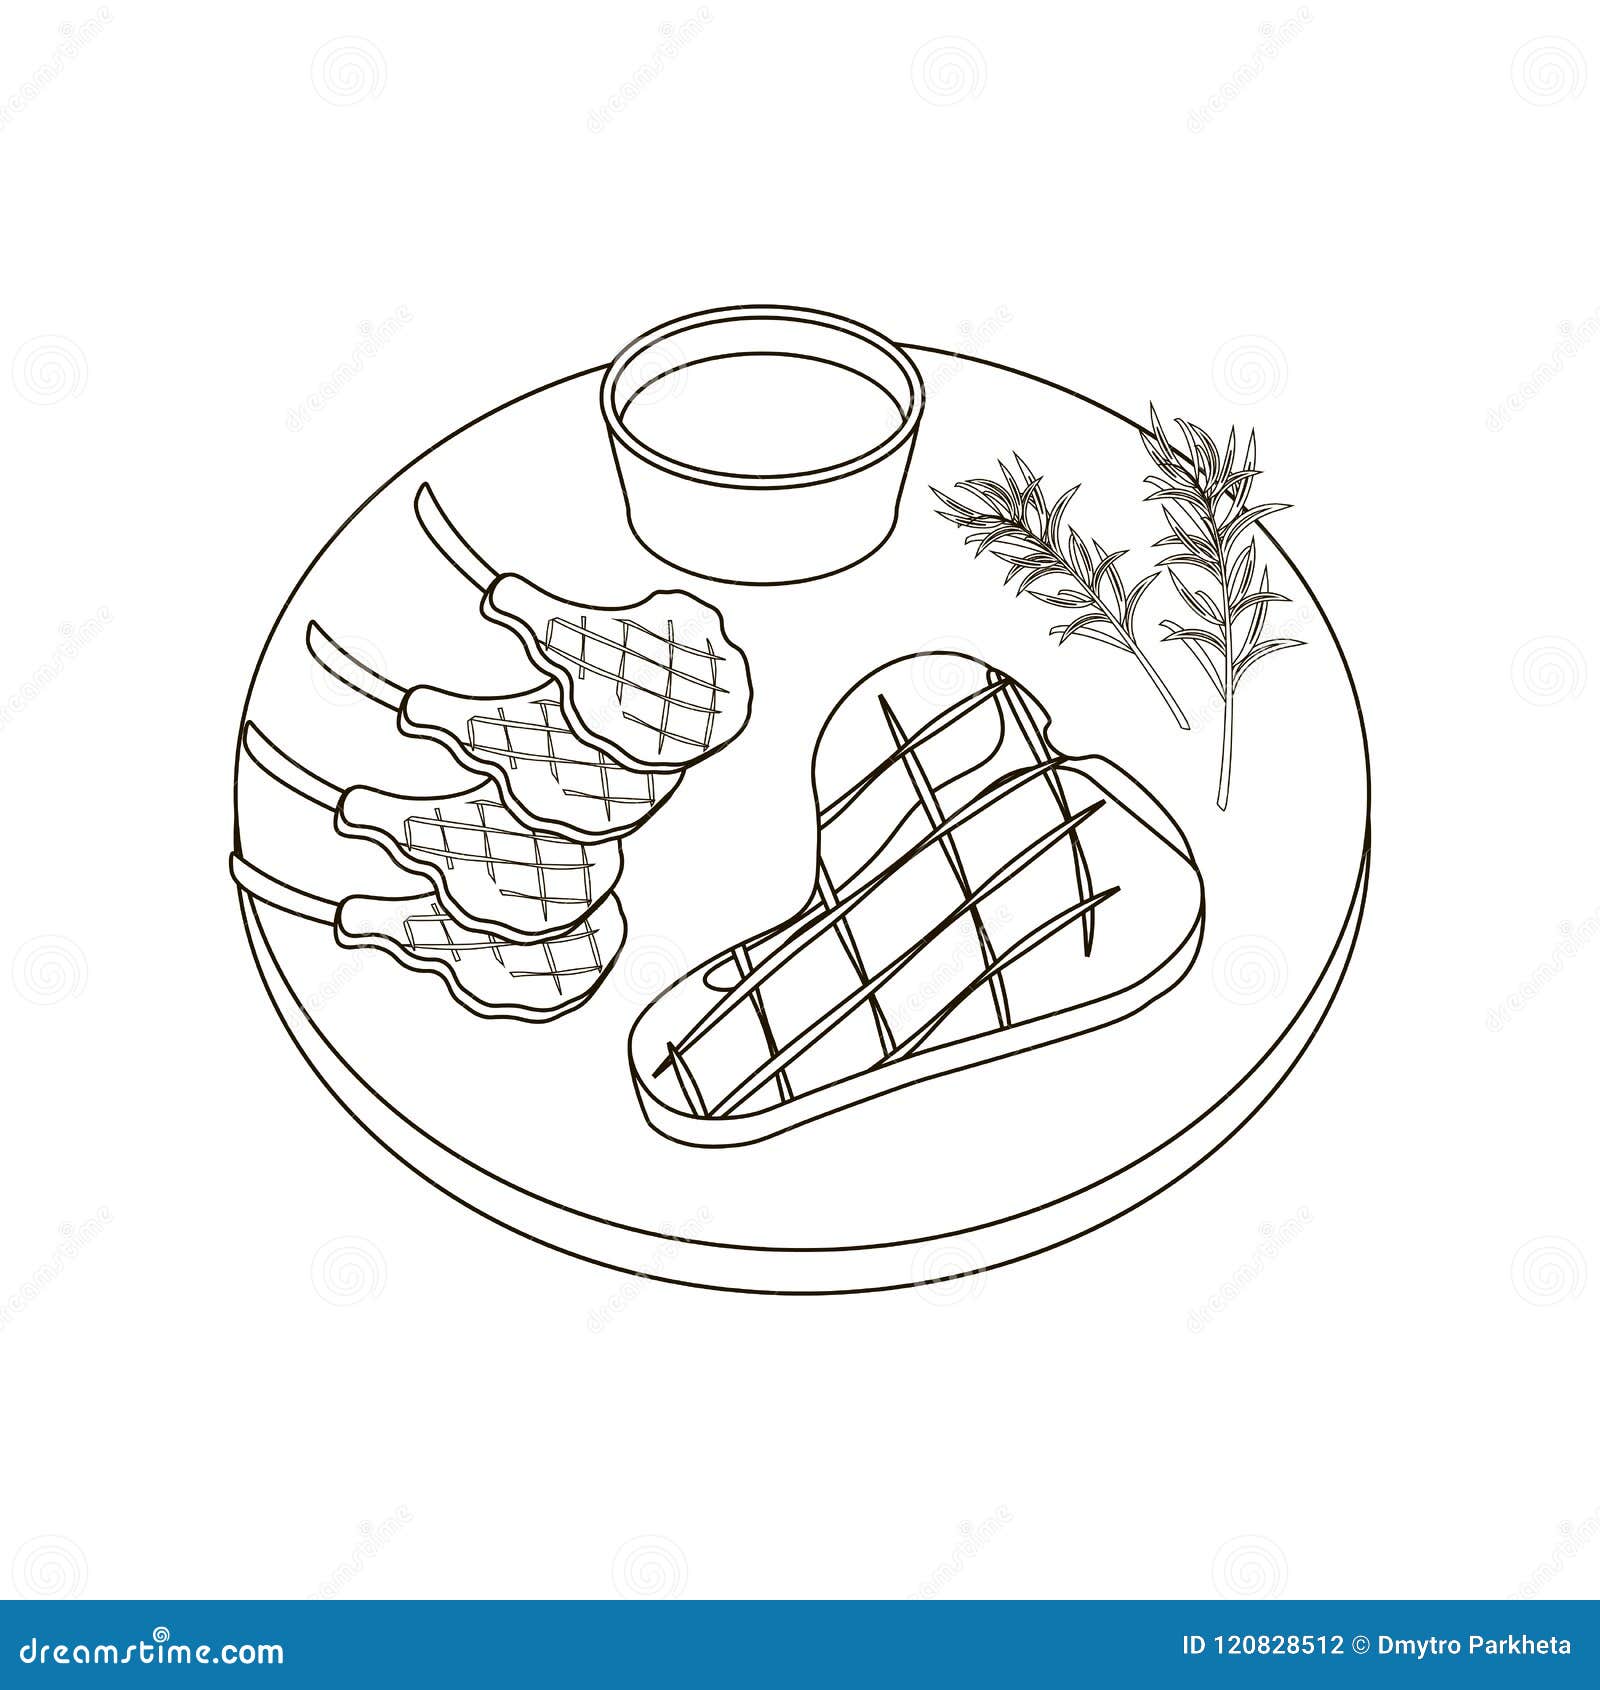 Download Steak meat coloring pages stock vector. Illustration of cartoon - 120828512